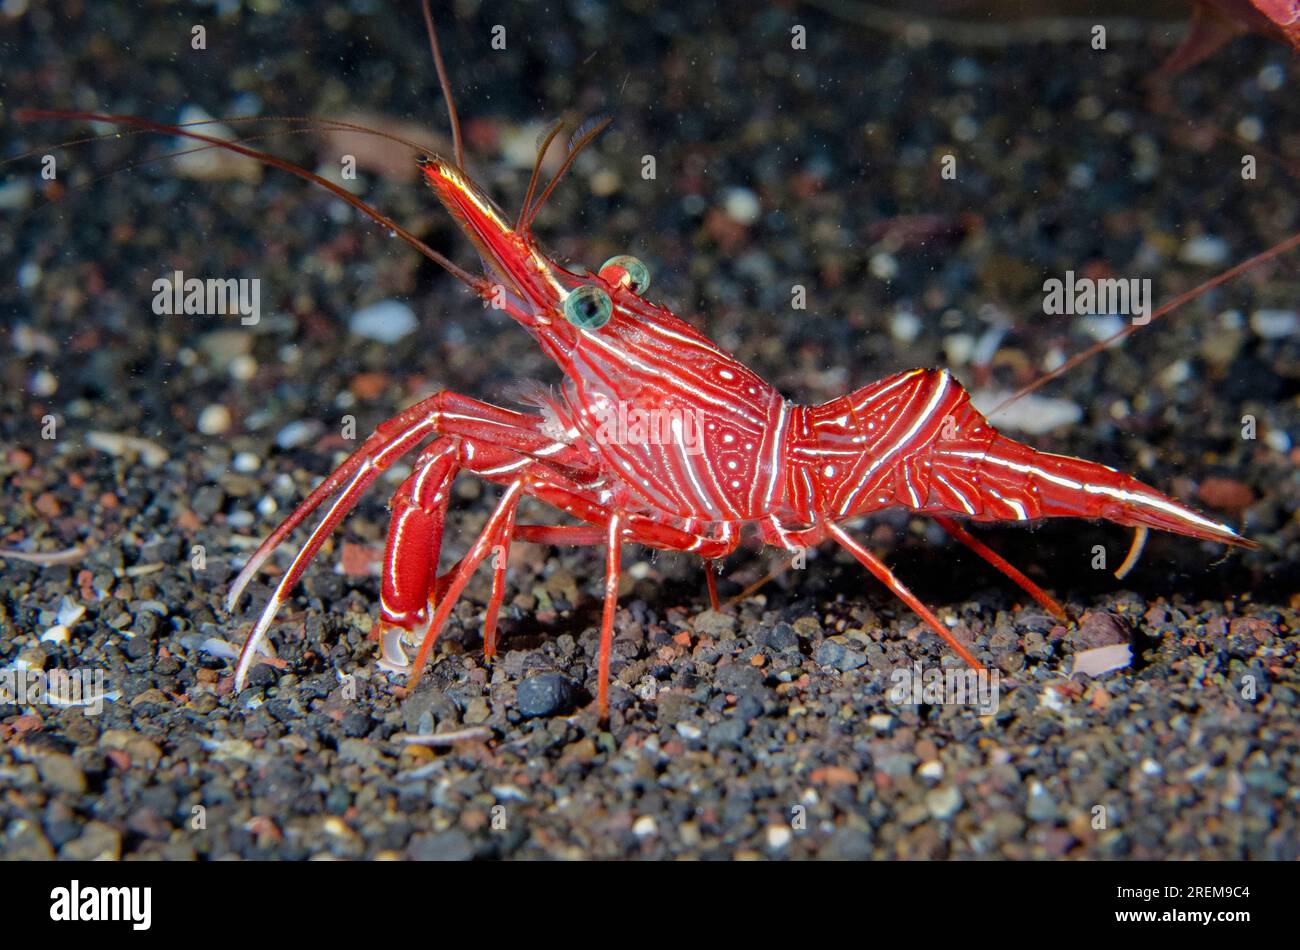 Dancing Shrimp, Rhynchocinetes durbanensis, Amed Beach dive site, Amed, Bali, Indonesia, Indian Ocean Stock Photo